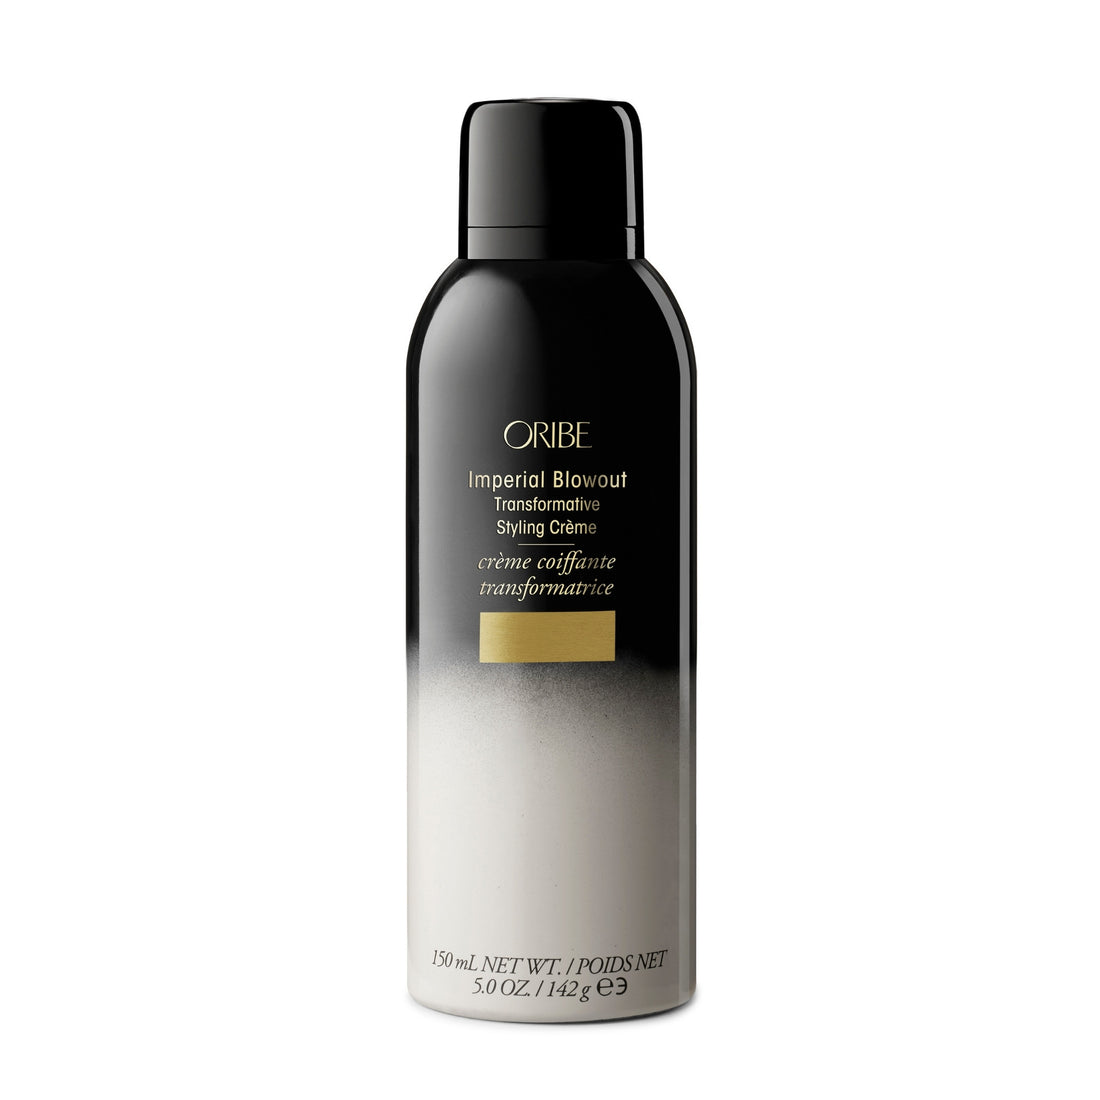 Oribe Imperial Blowout Tranformative Styling Crème